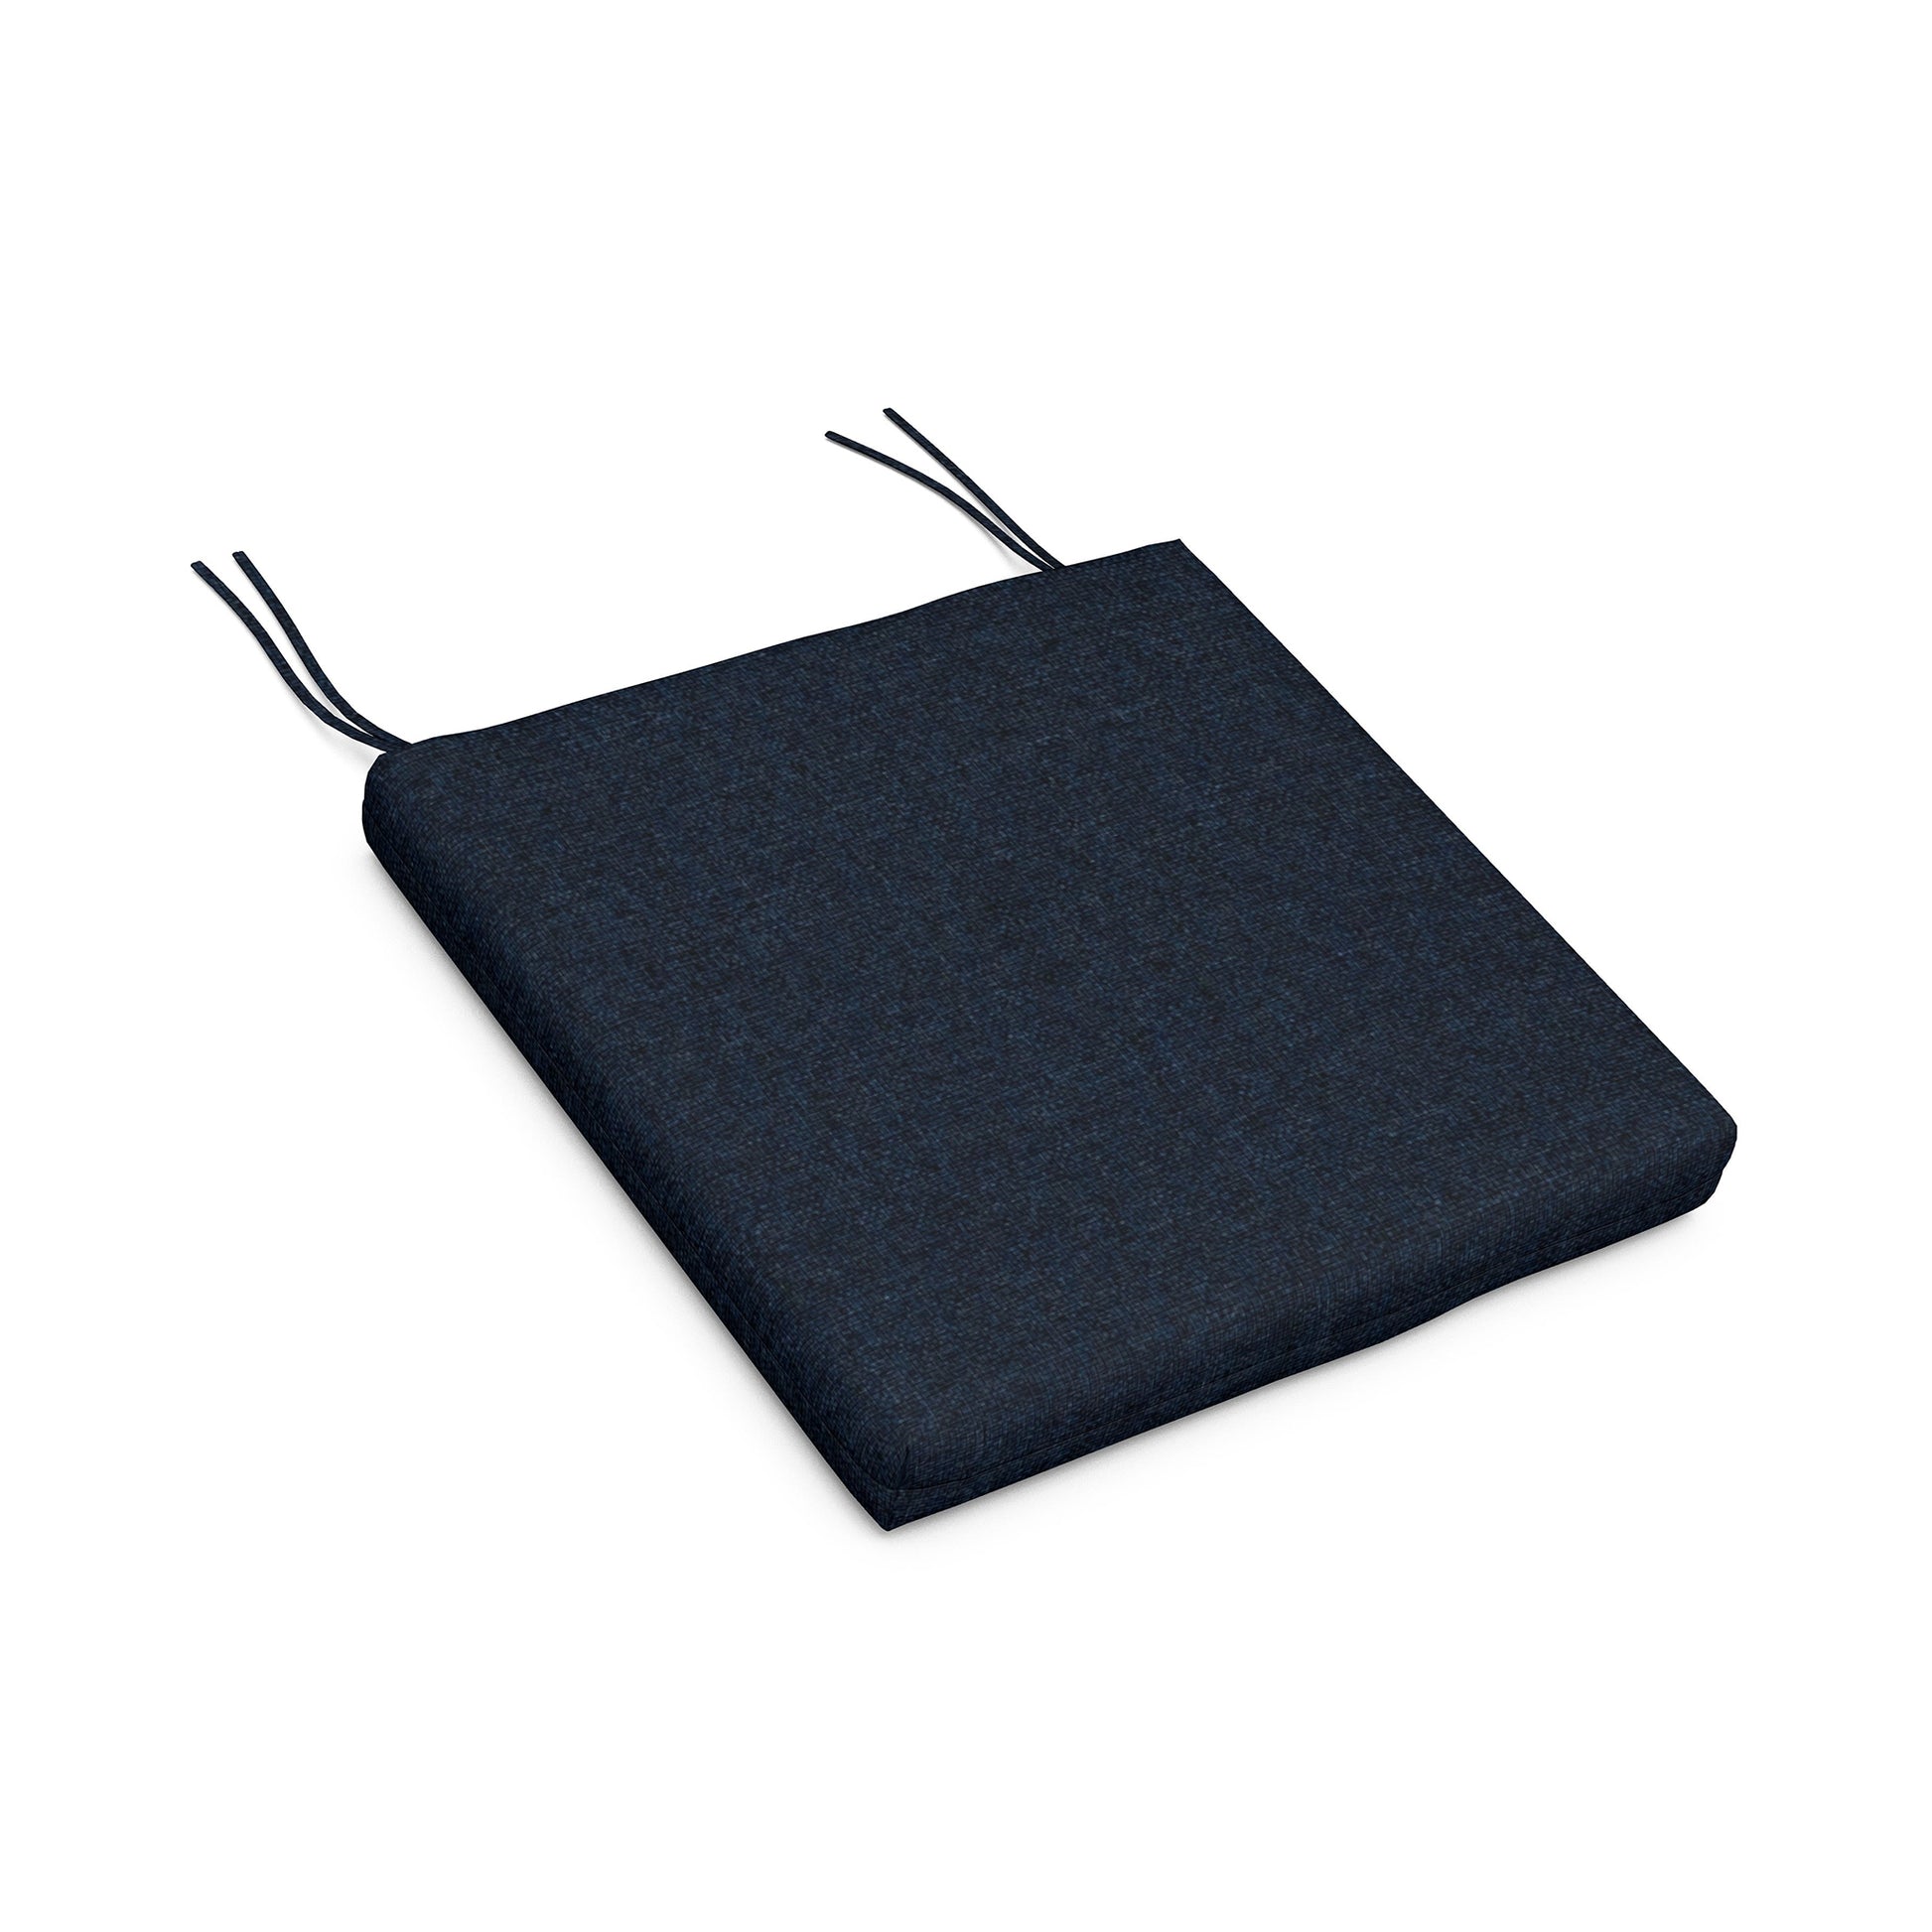 A square, dark blue POLYWOOD Adirondack chair cushion with two attached black tie strings, displayed against a white background.